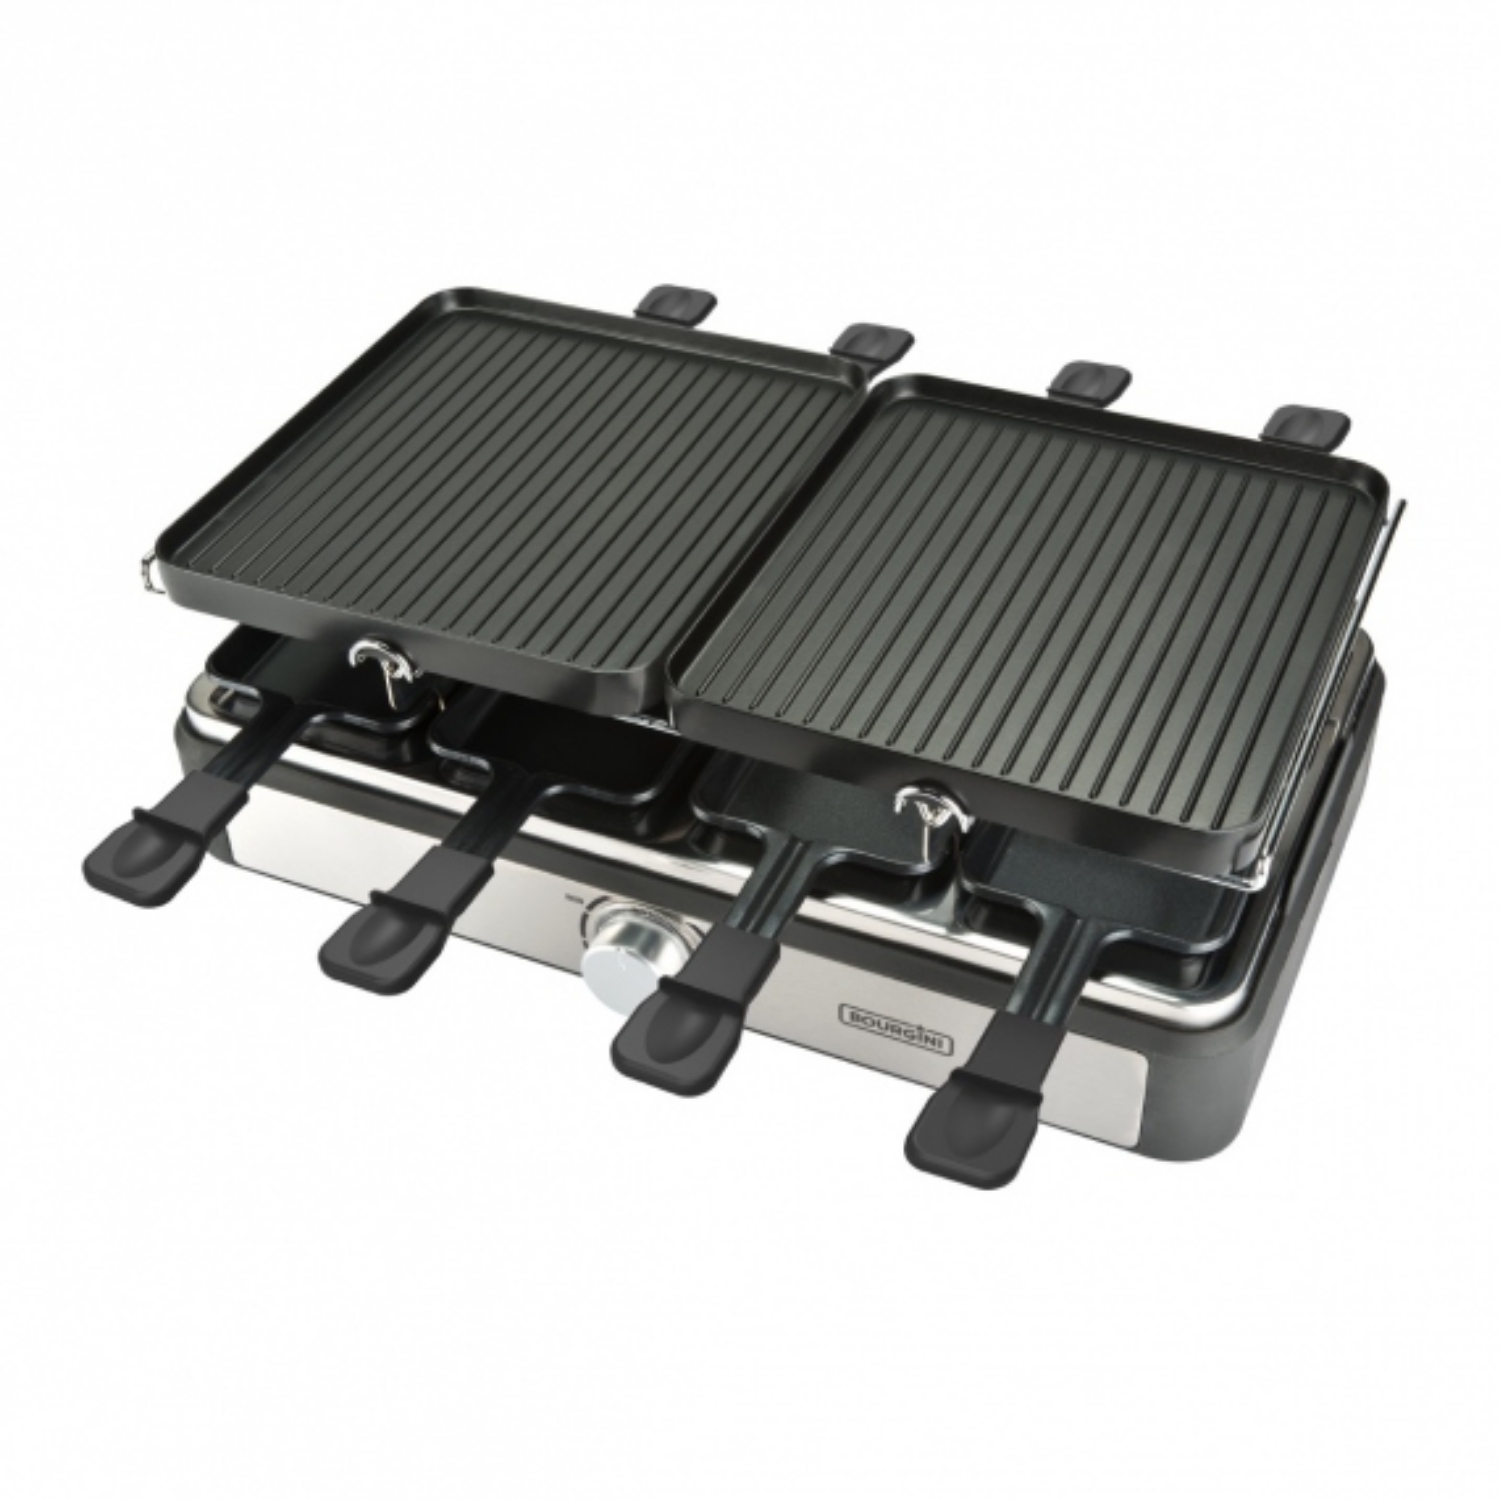 BOURGINI GOURMET STEL + GRILL  8 PERS - 209 1008